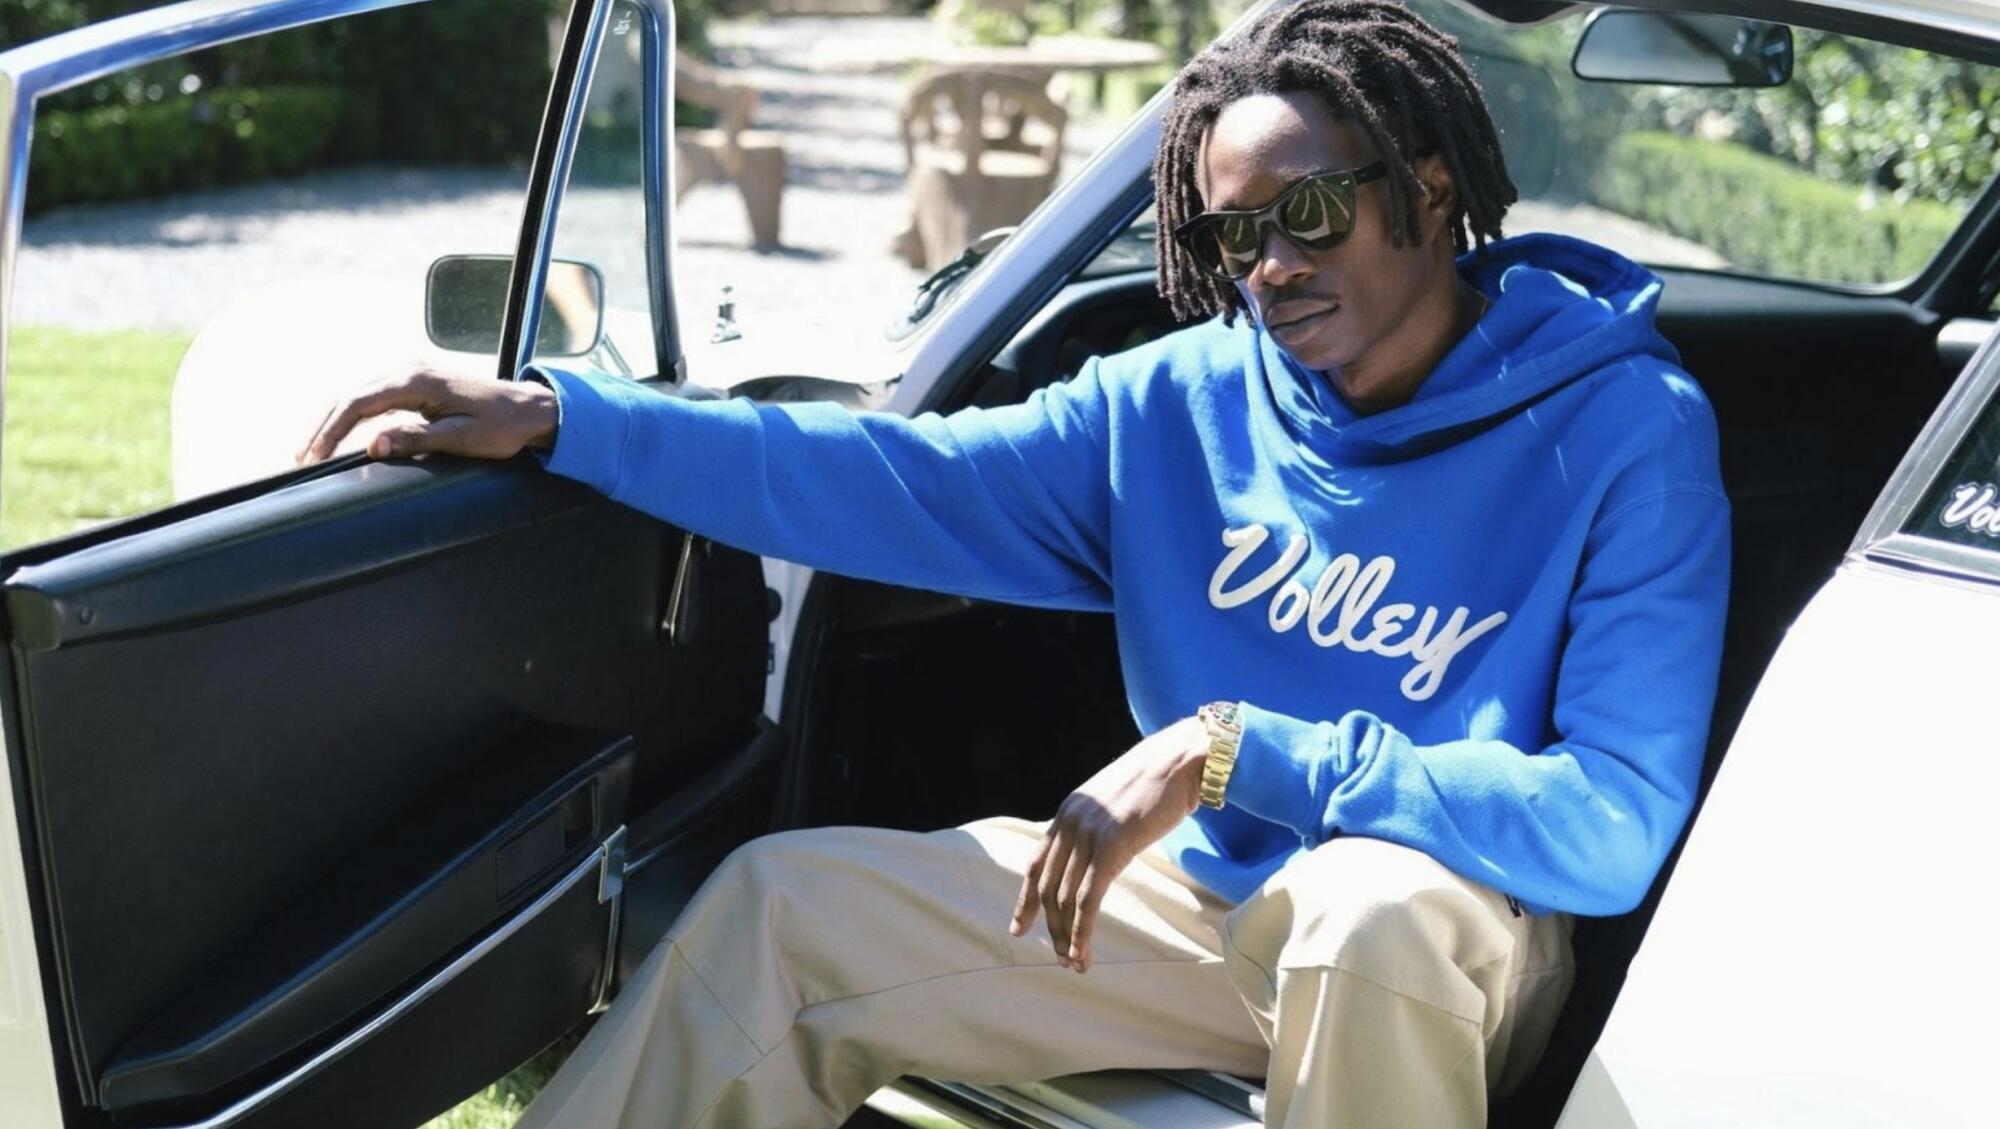 A man sits in a convertible car with the door open, wearing a blue hoodie with the word "Volley" in white script.